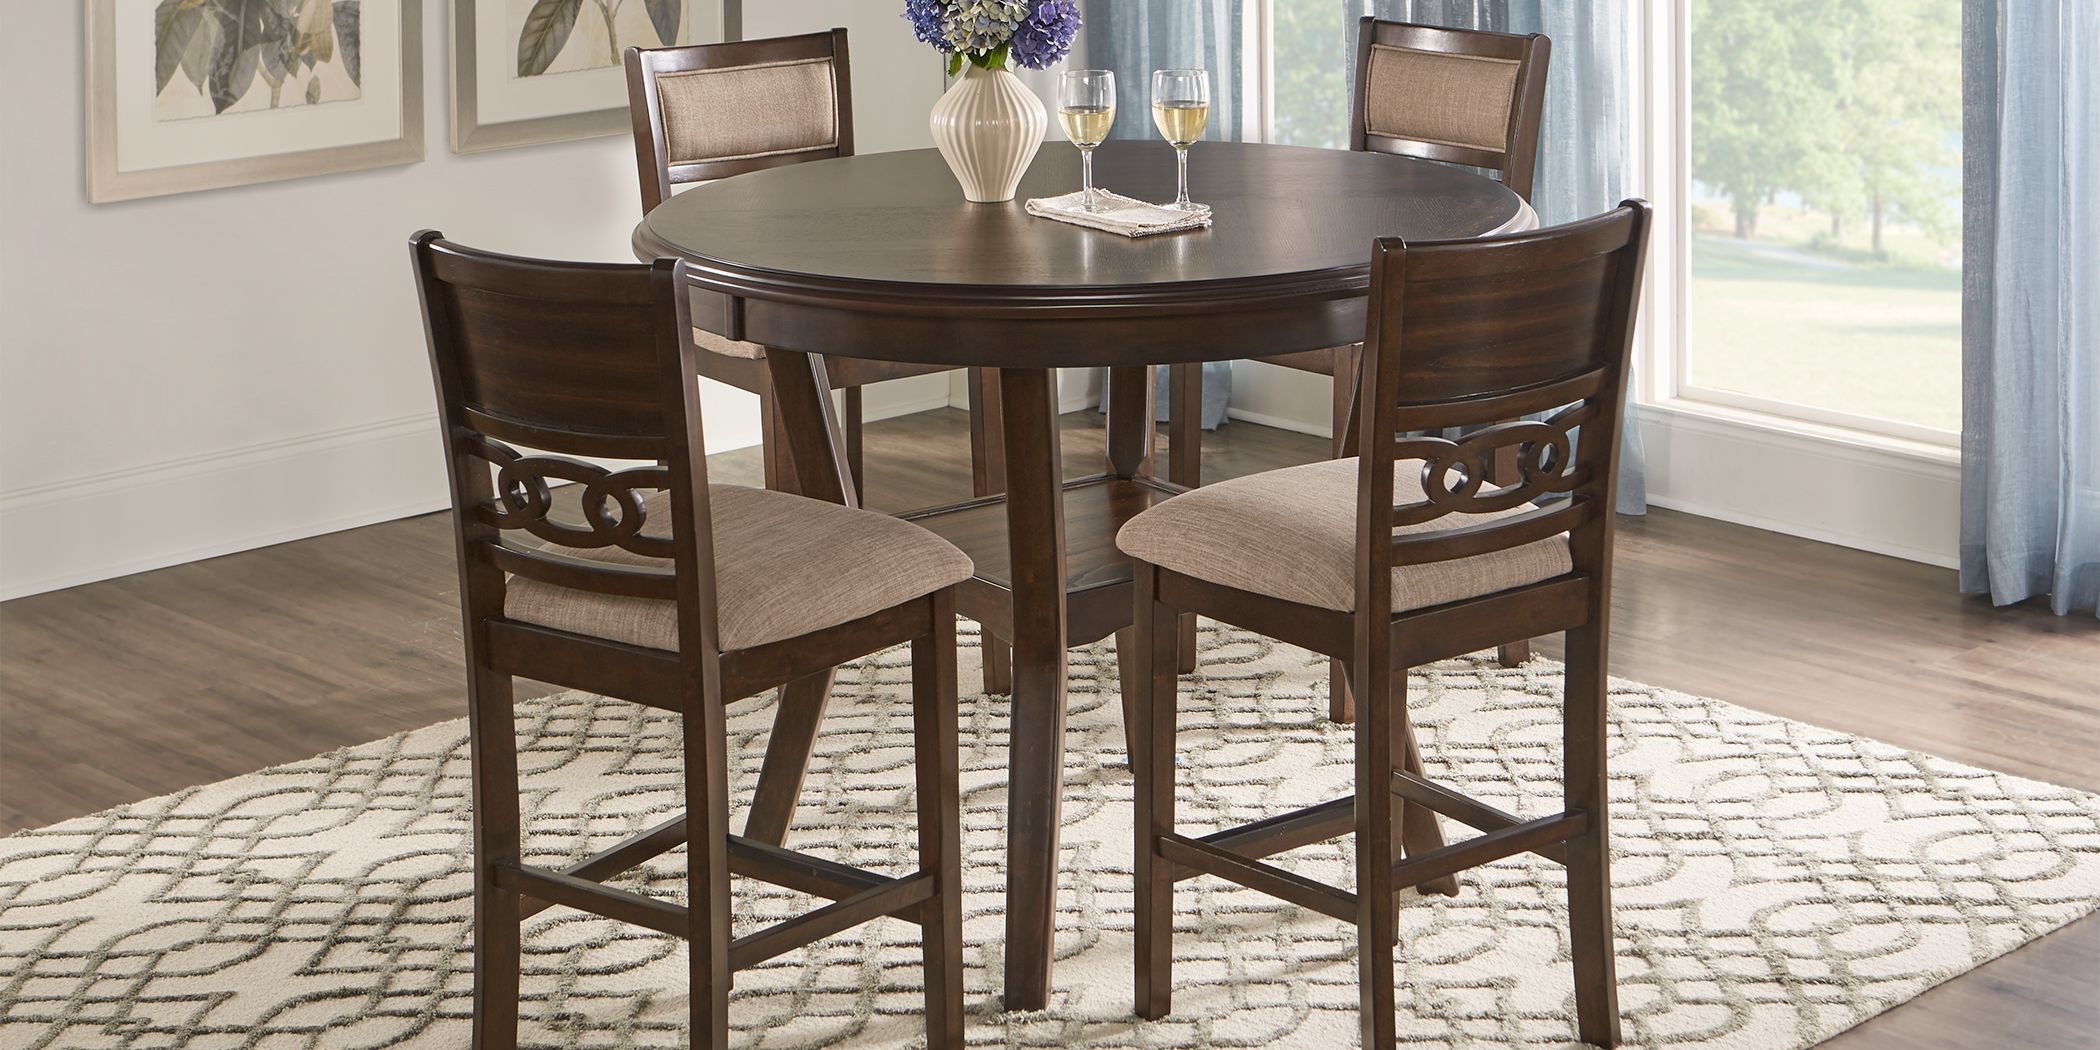 Round Counter Height Dining Set, Tall Round Dining Room Tables